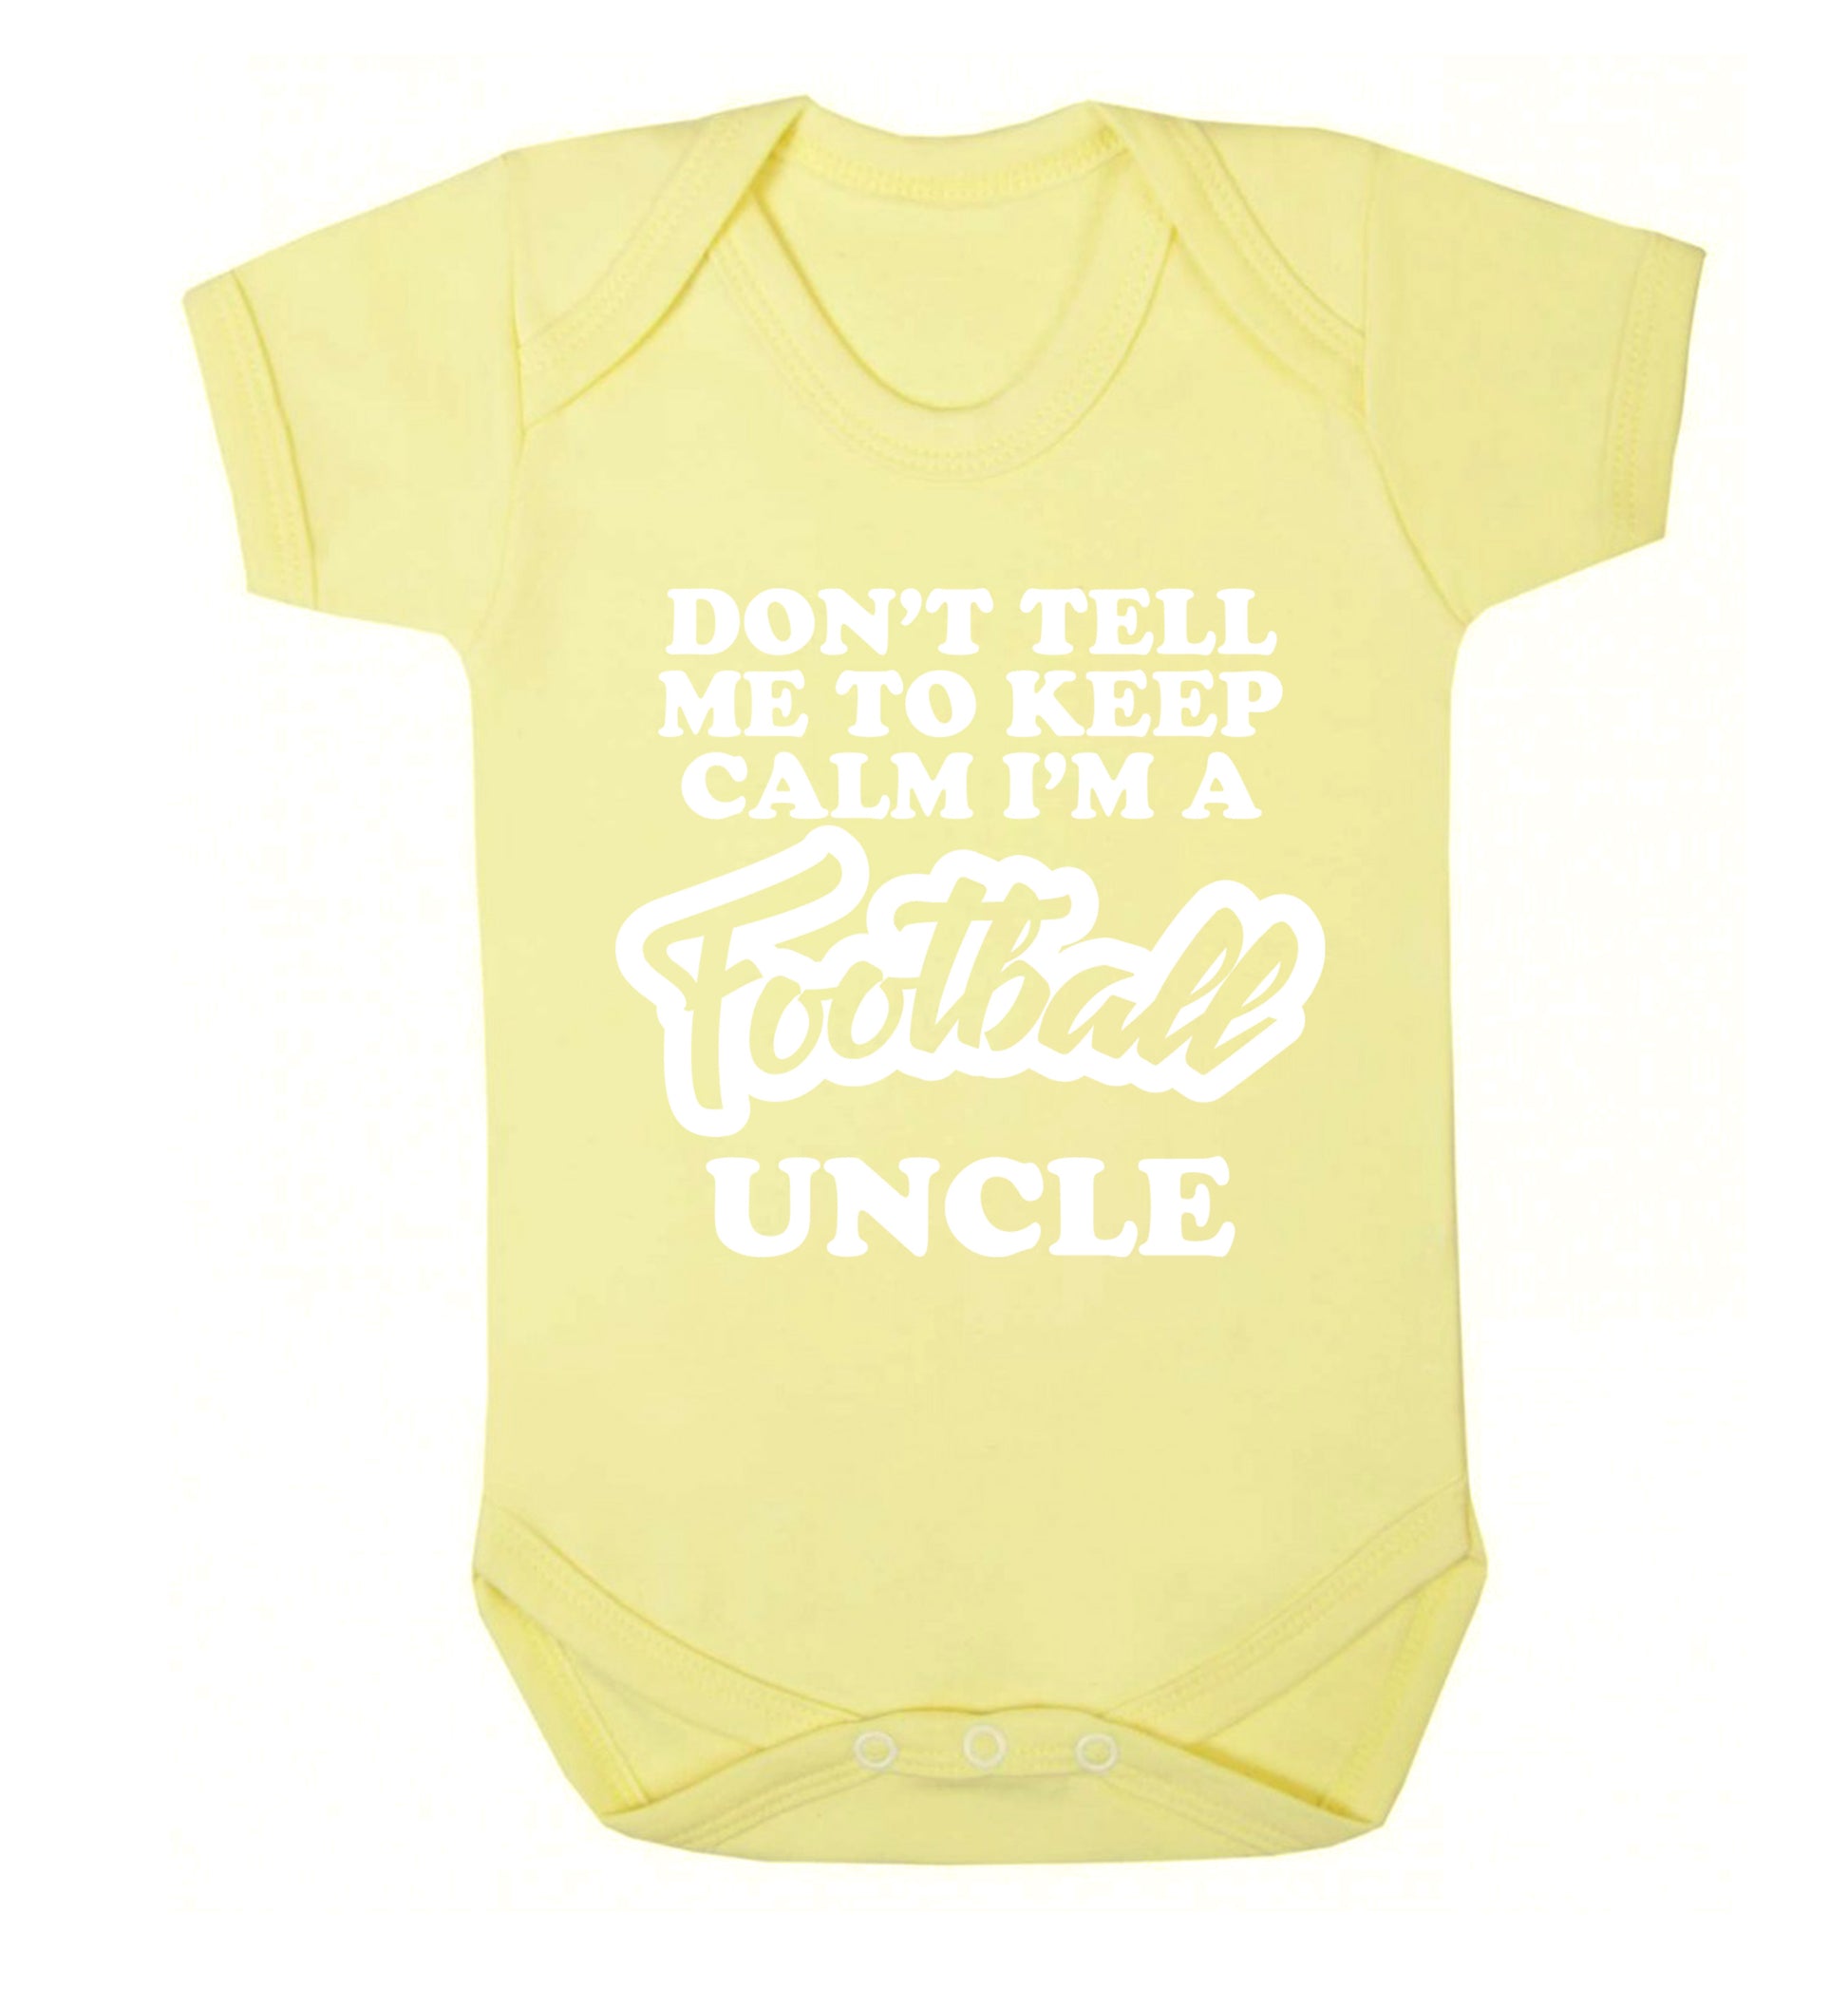 Don't tell me to keep calm I'm a football uncle Baby Vest pale yellow 18-24 months